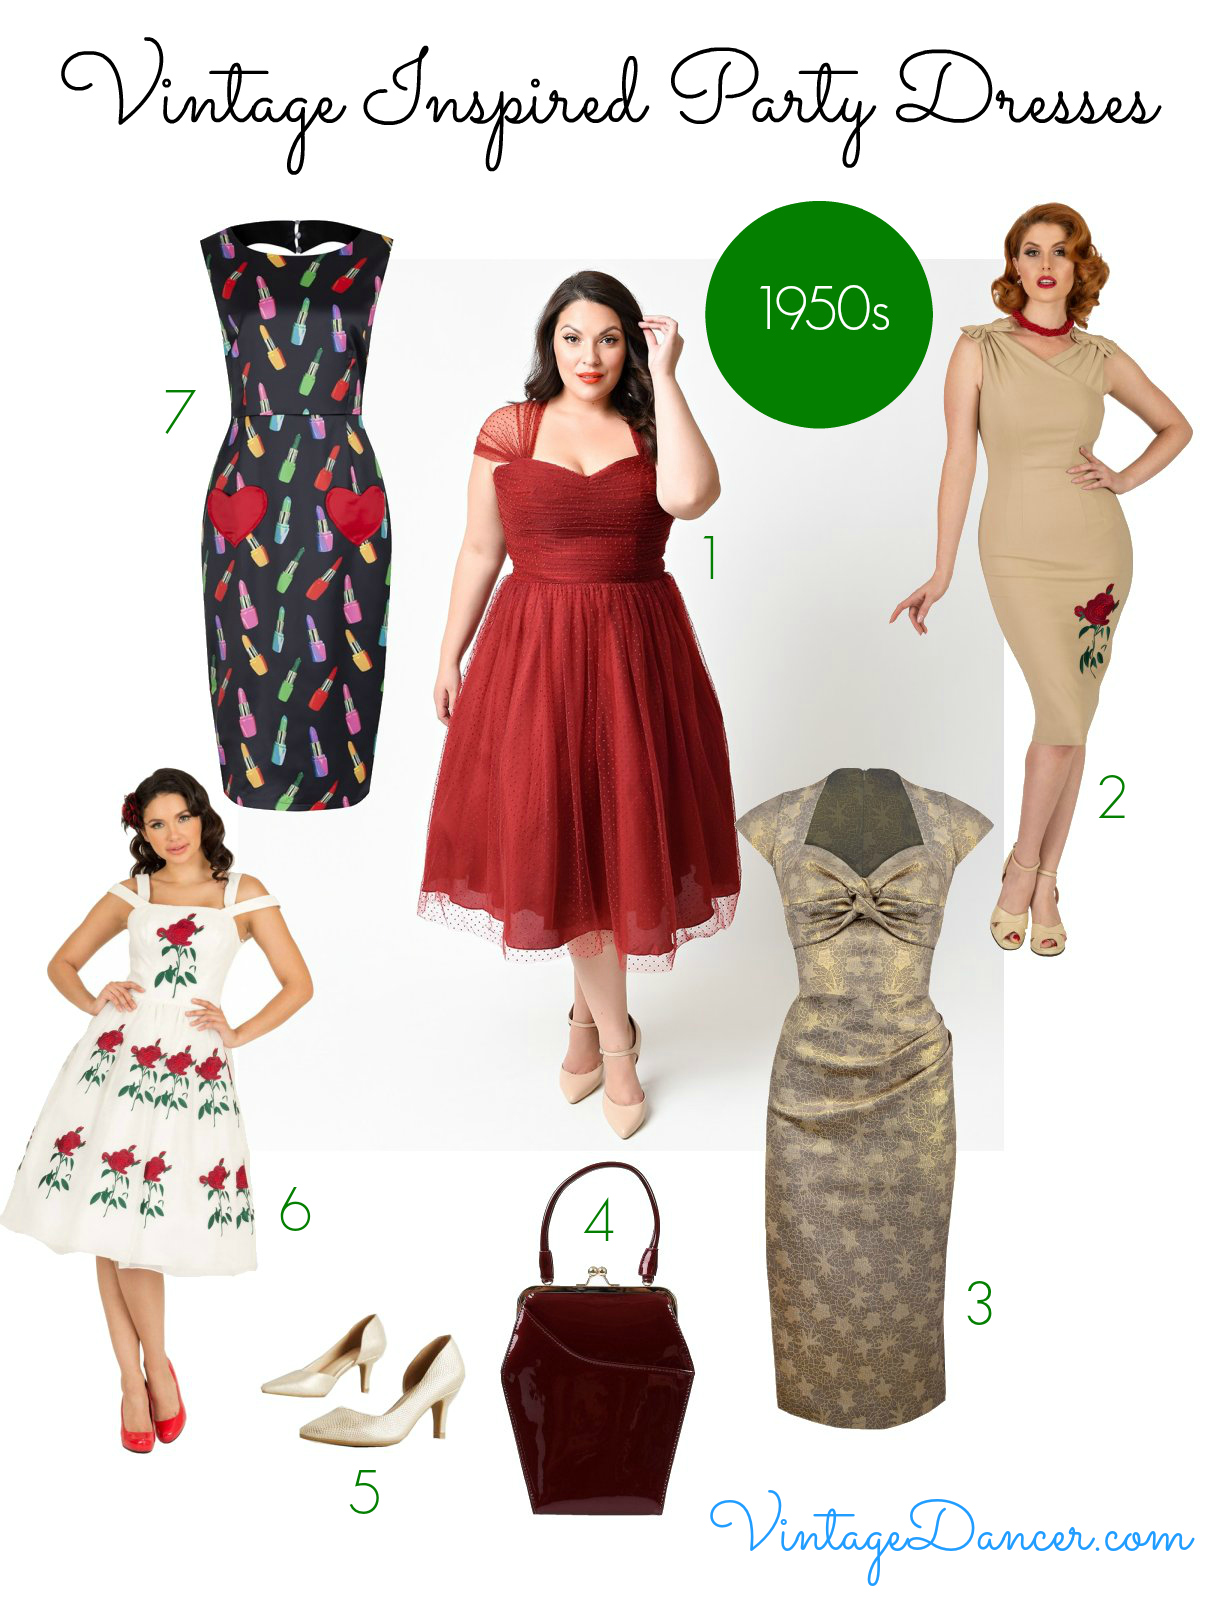 Vintage Inspired Party Dress 61